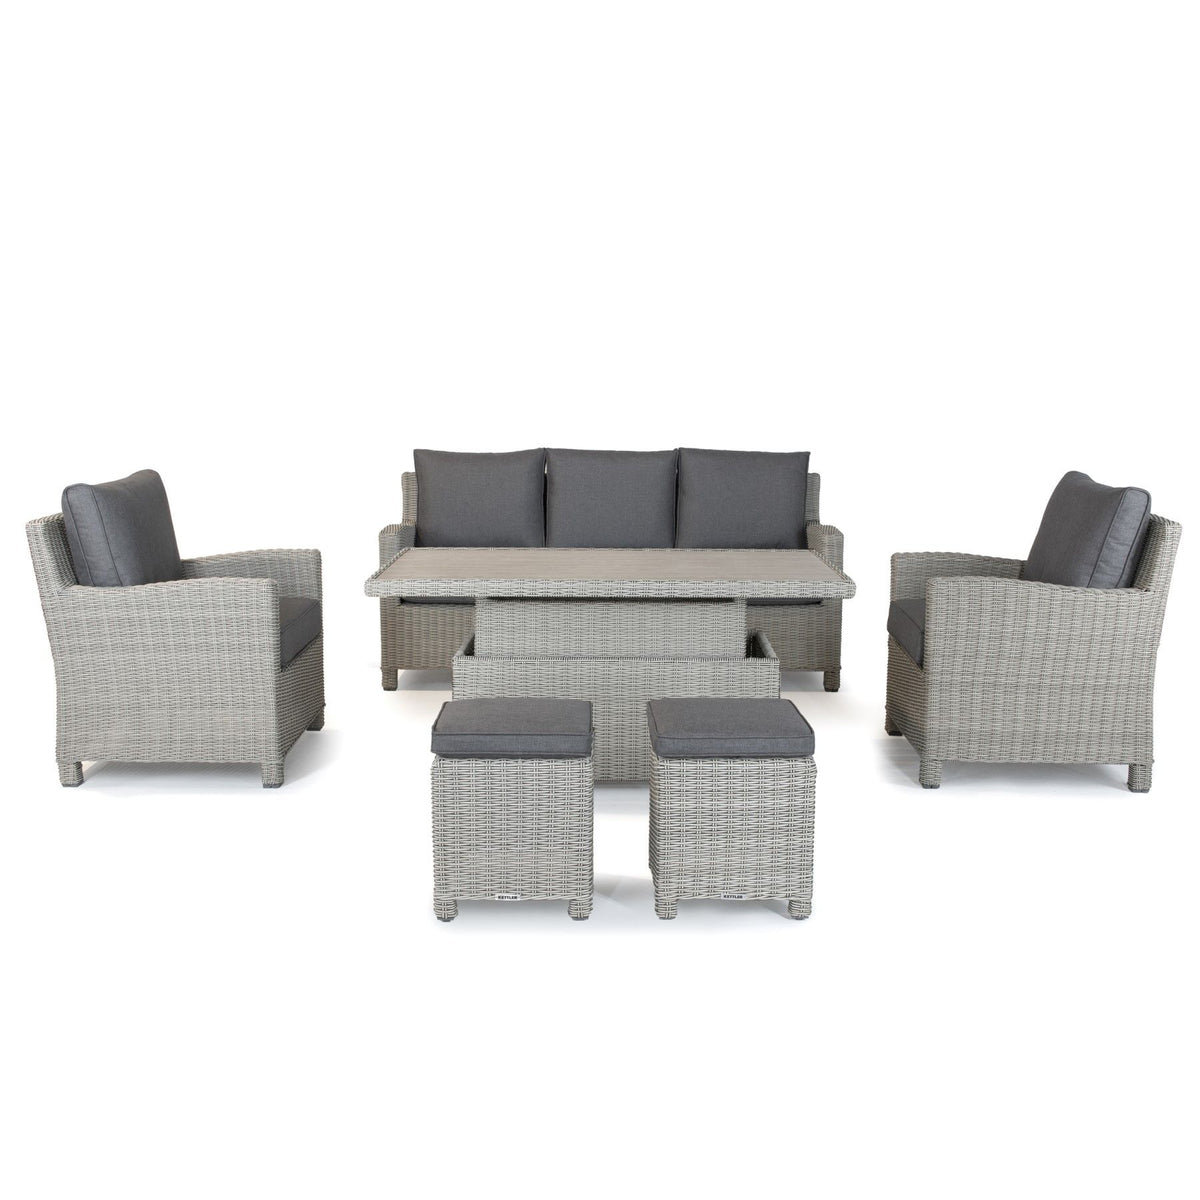 Kettler Palma Signature White Wash Wicker Lounge Sofa Set with High Low Slat Top Table